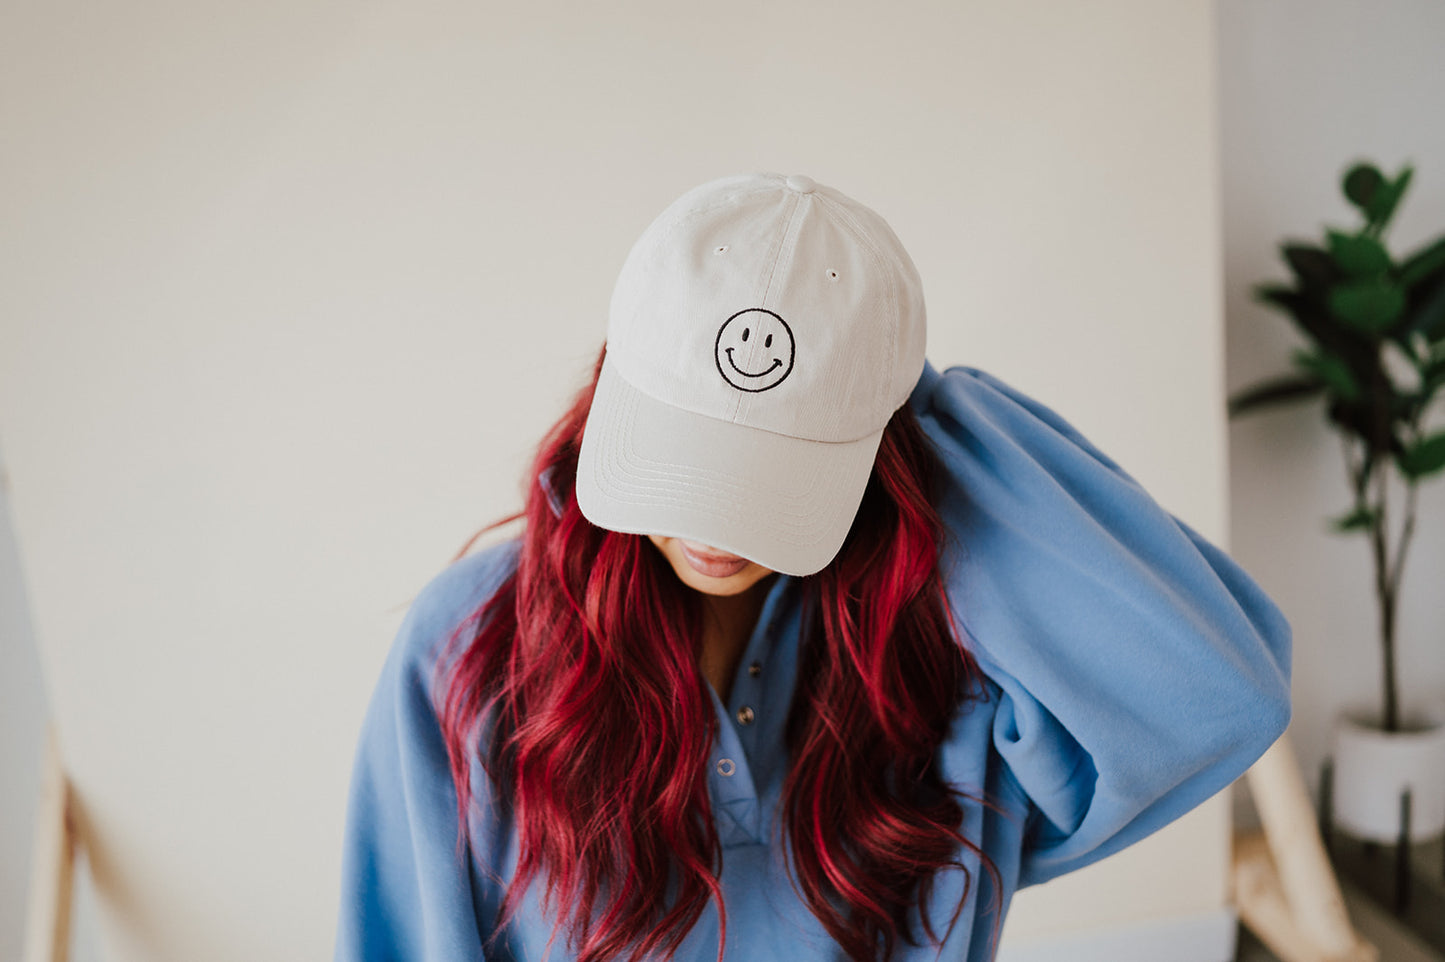 Smiley Face Embroidered Hats *available in tan and white*